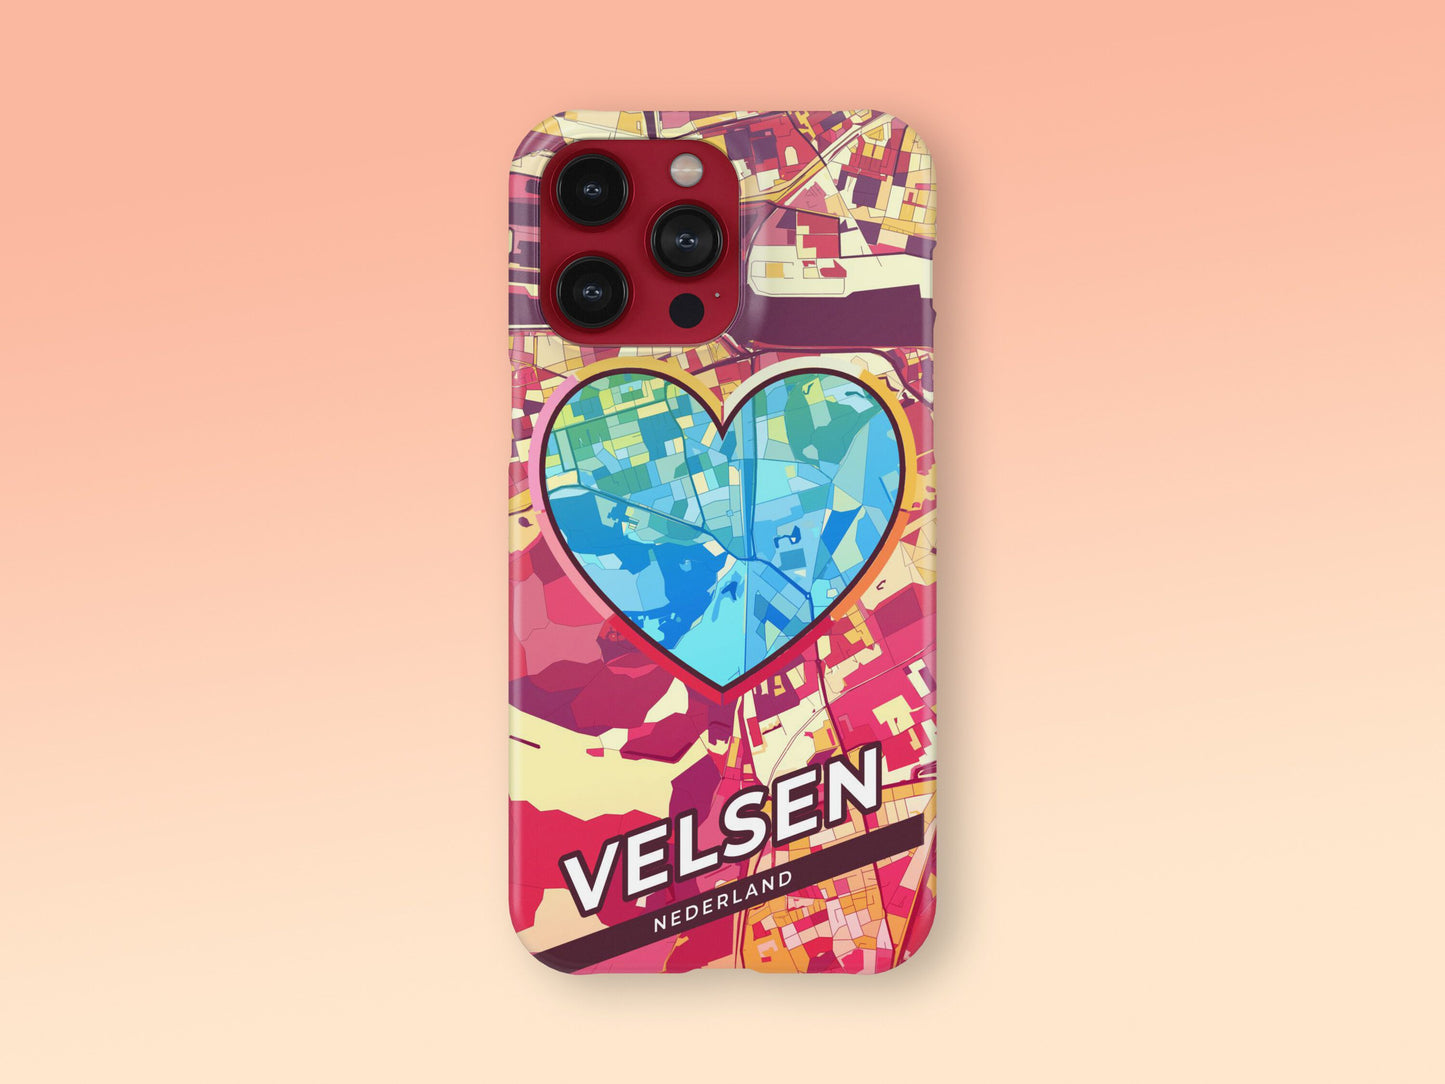 Velsen Netherlands slim phone case with colorful icon 2